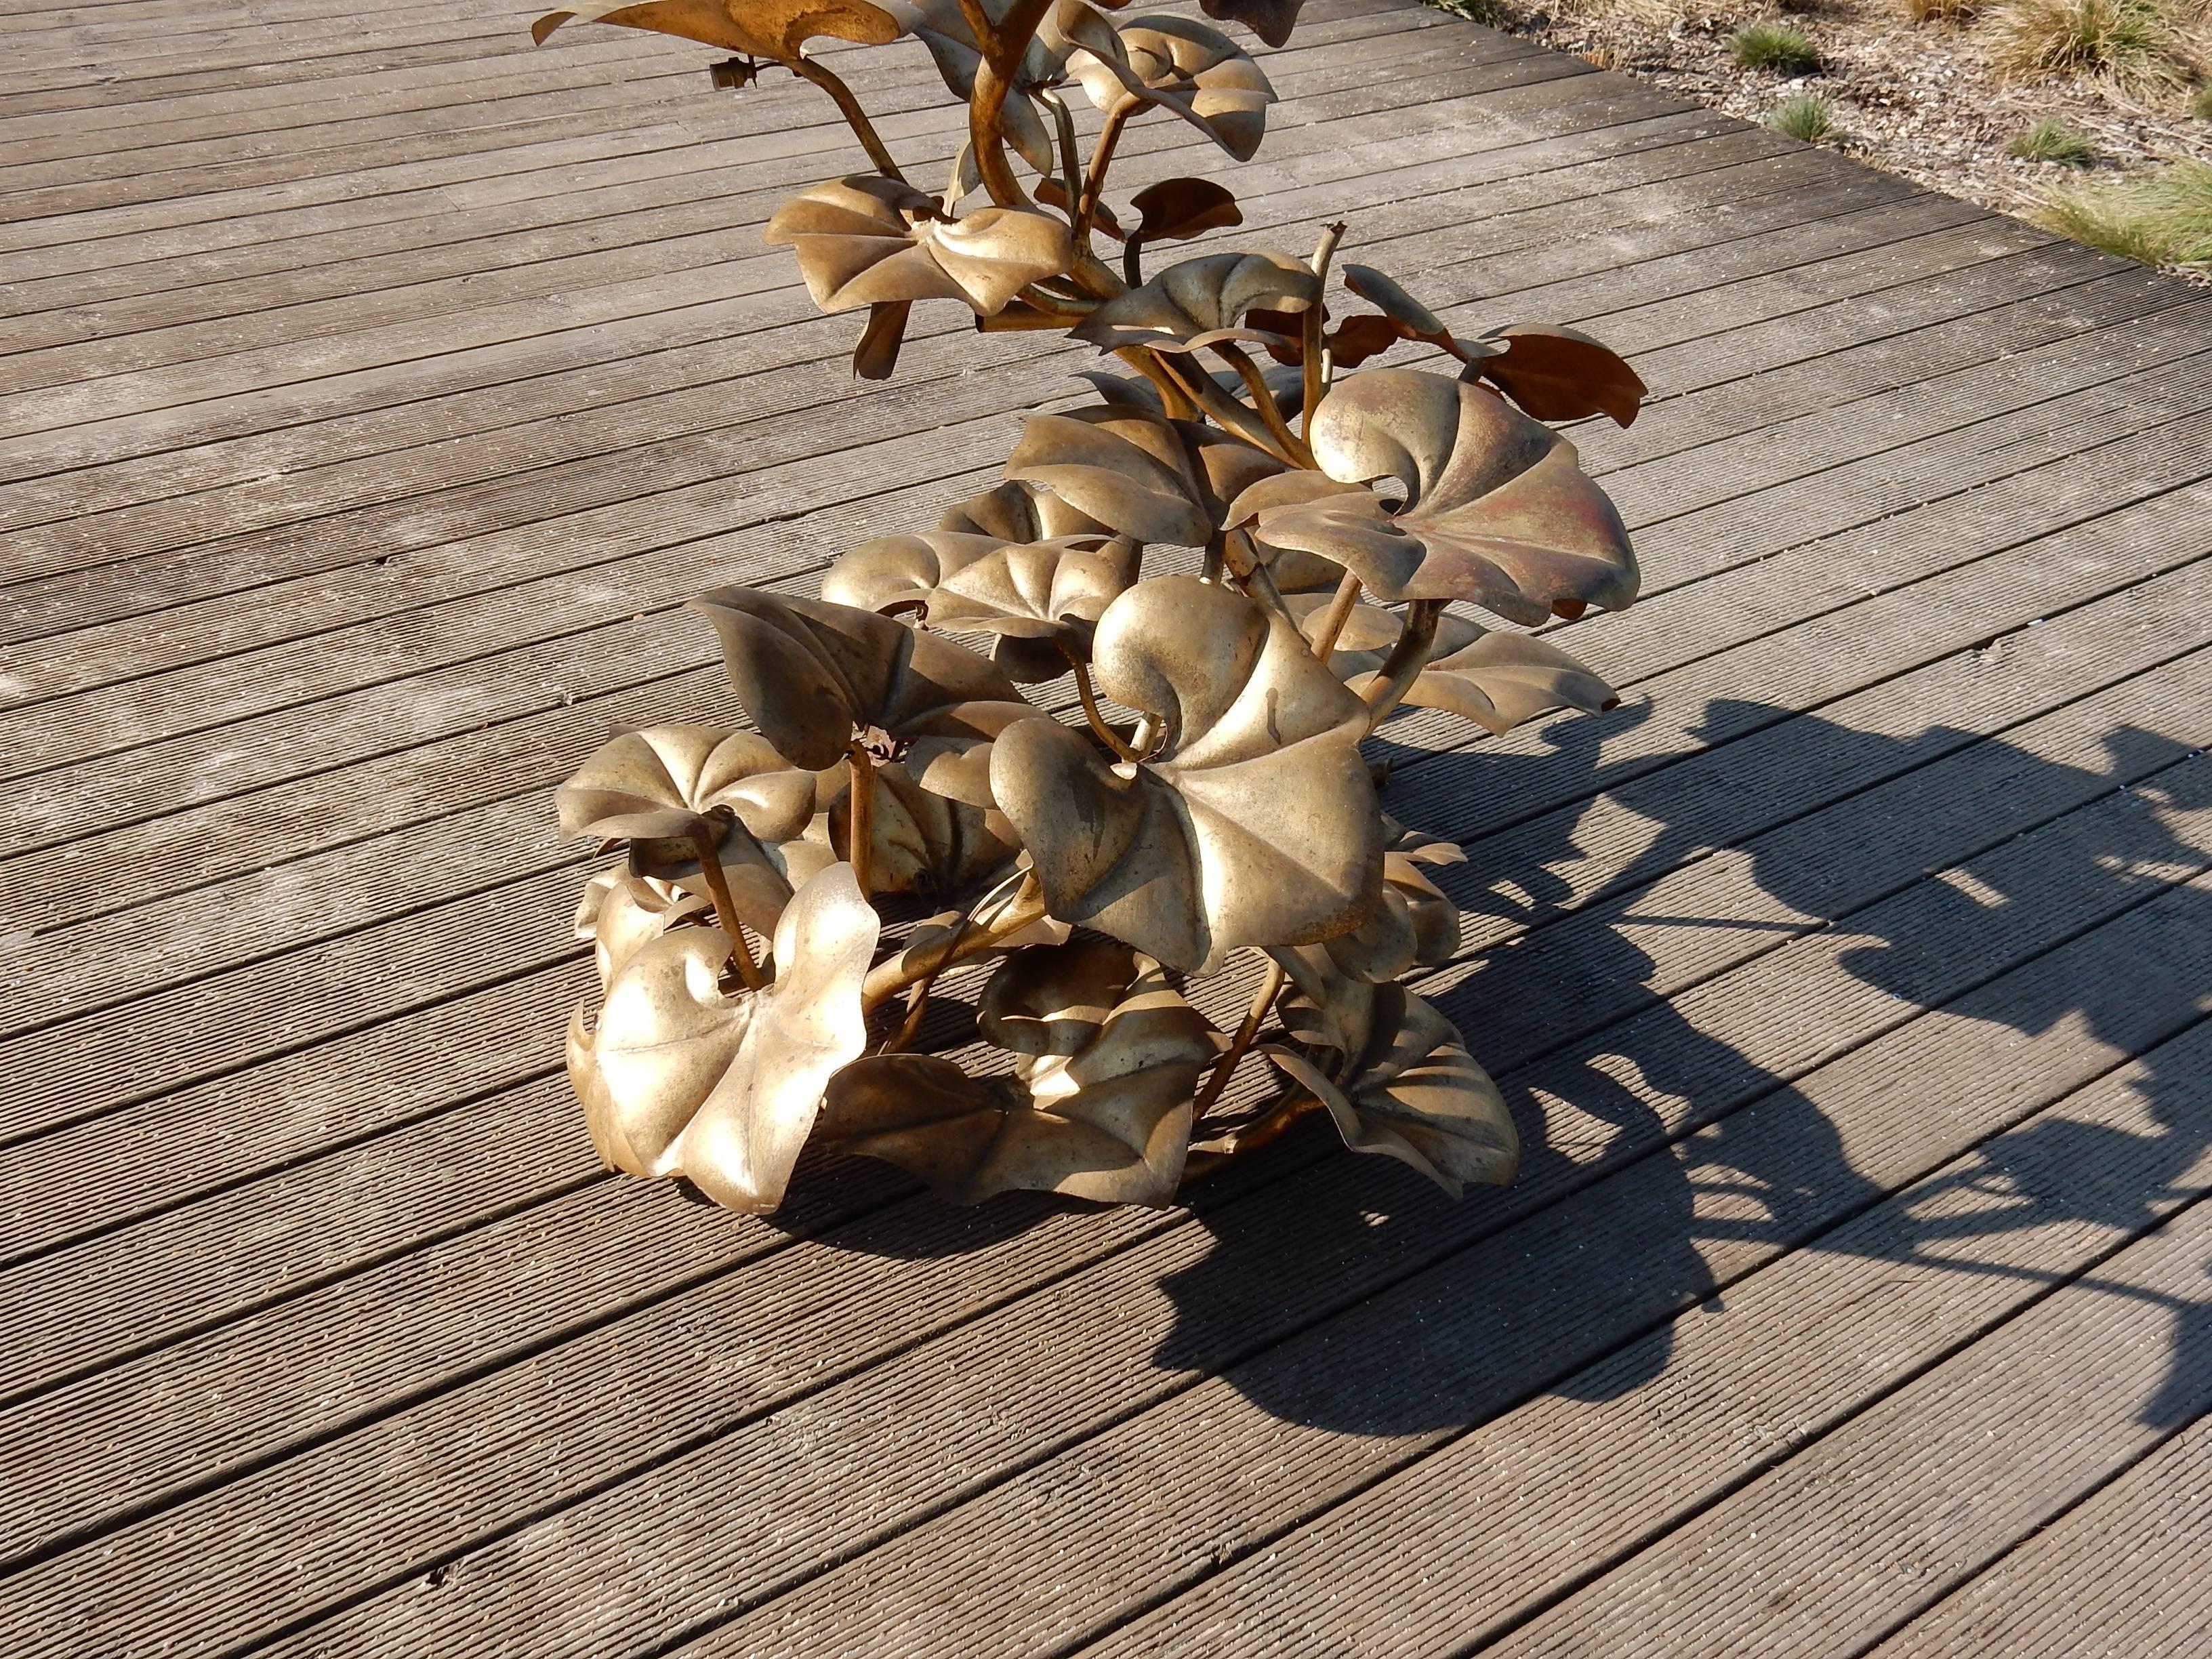 Late 20th Century 1950-1970 Floor Lamp in the Foliage H 2m00